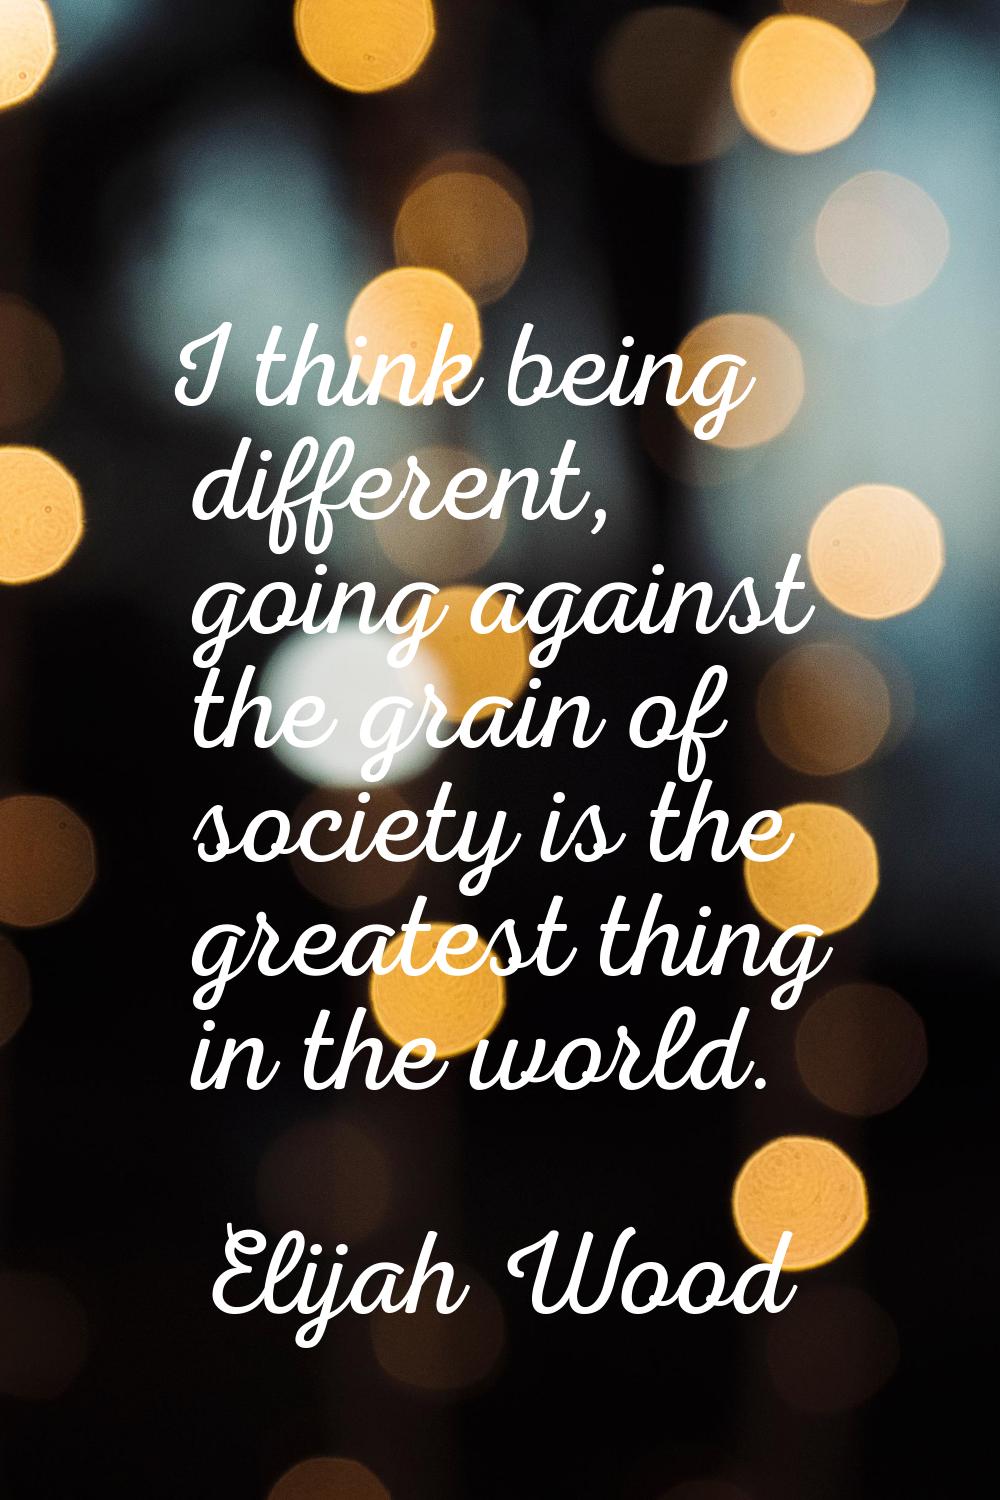 I think being different, going against the grain of society is the greatest thing in the world.